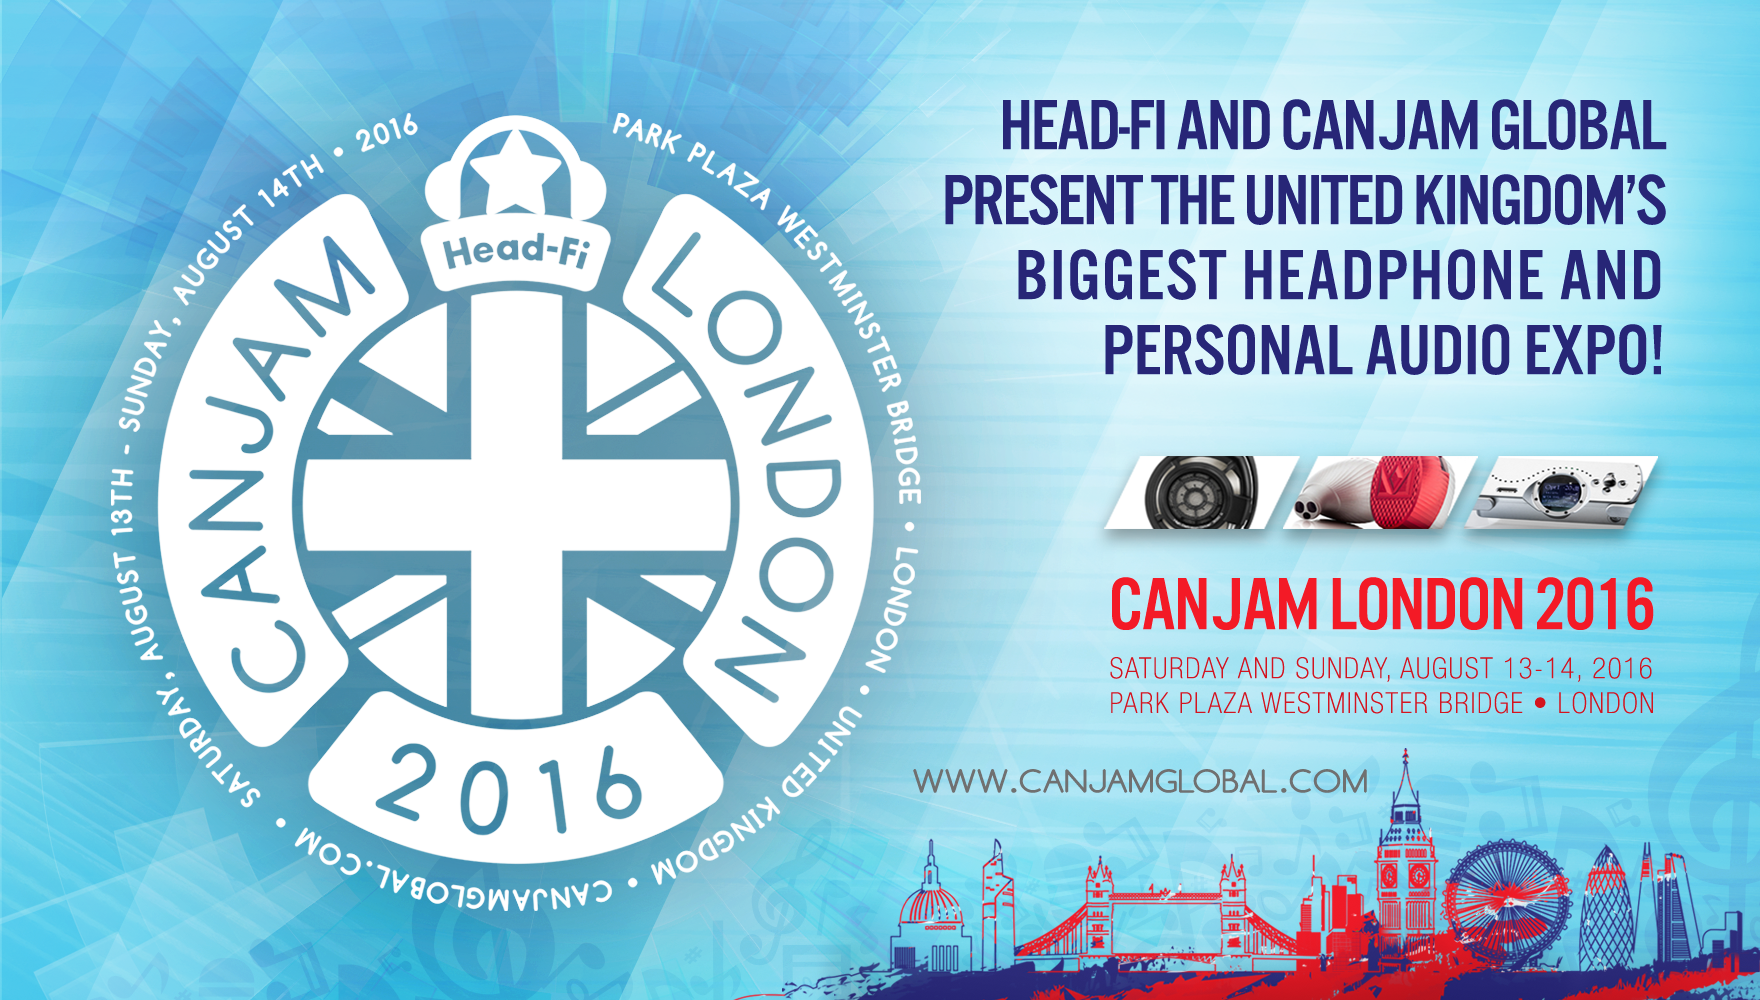 We're at CanJam London this weekend!